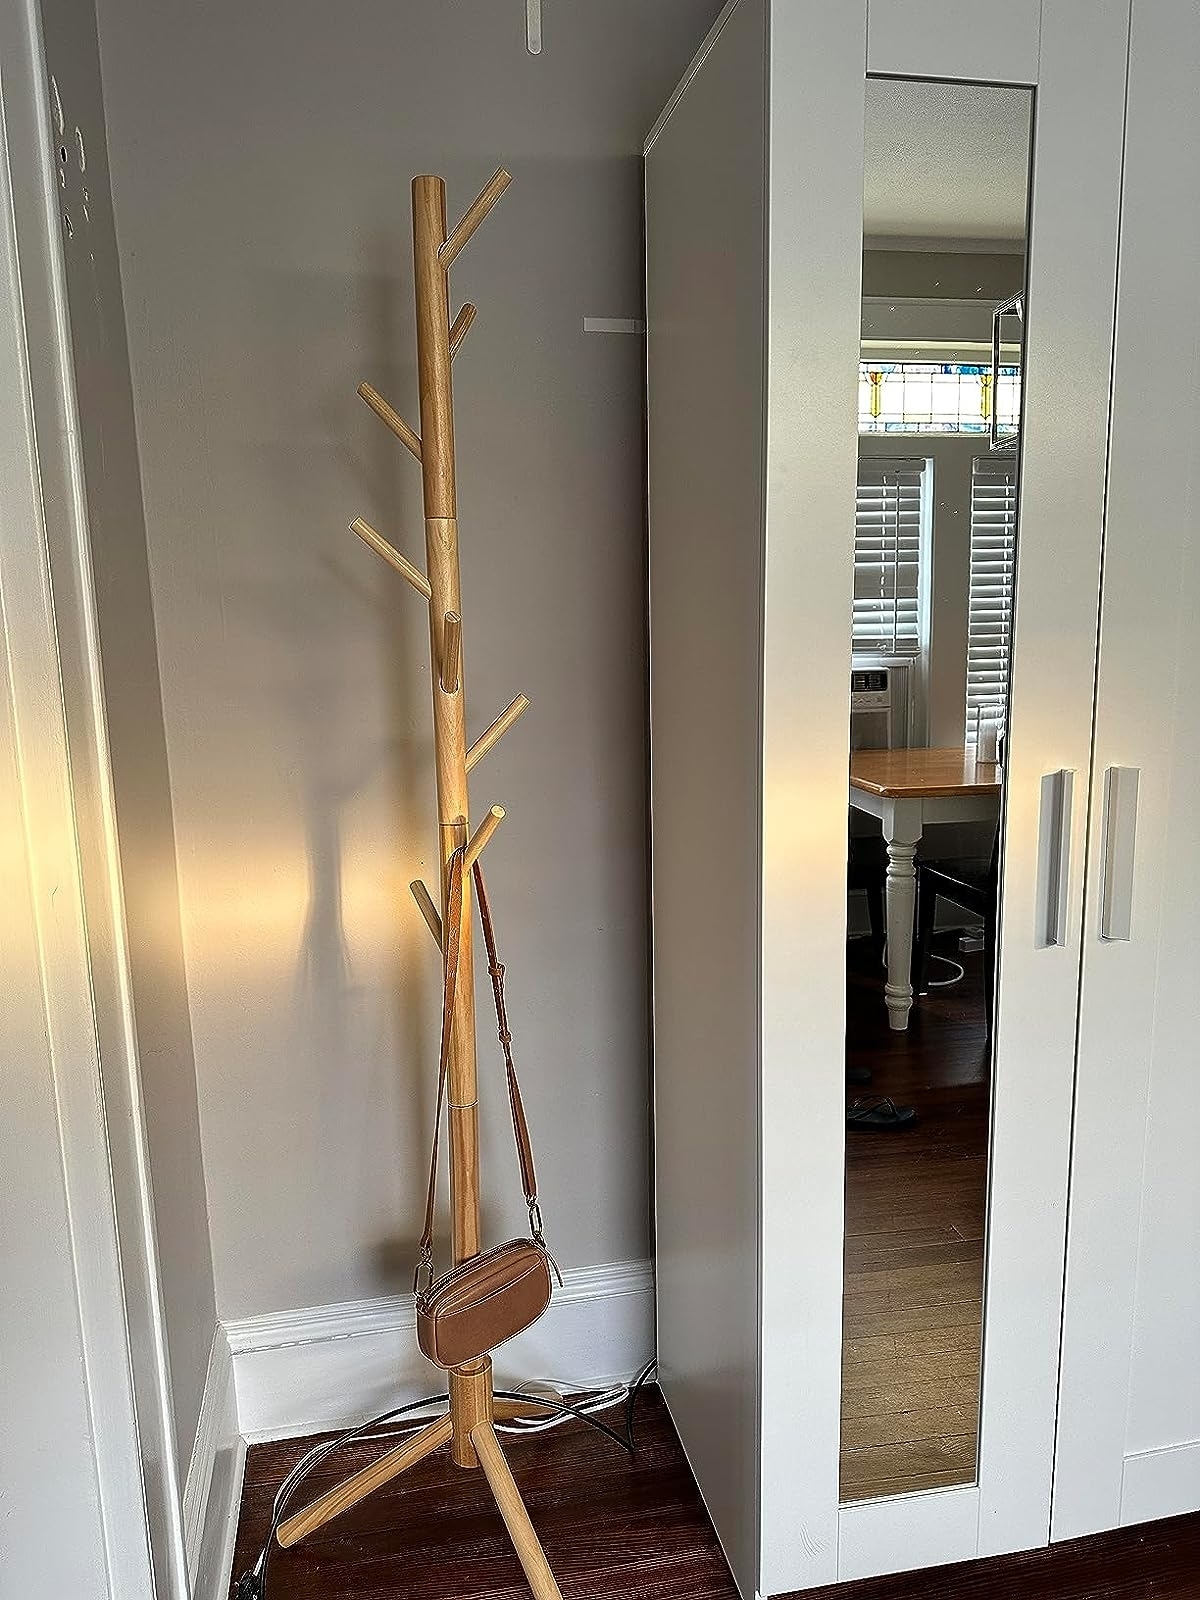 Reviewer image of the light wood coat rack with a bag hanging on it in the corner of a room